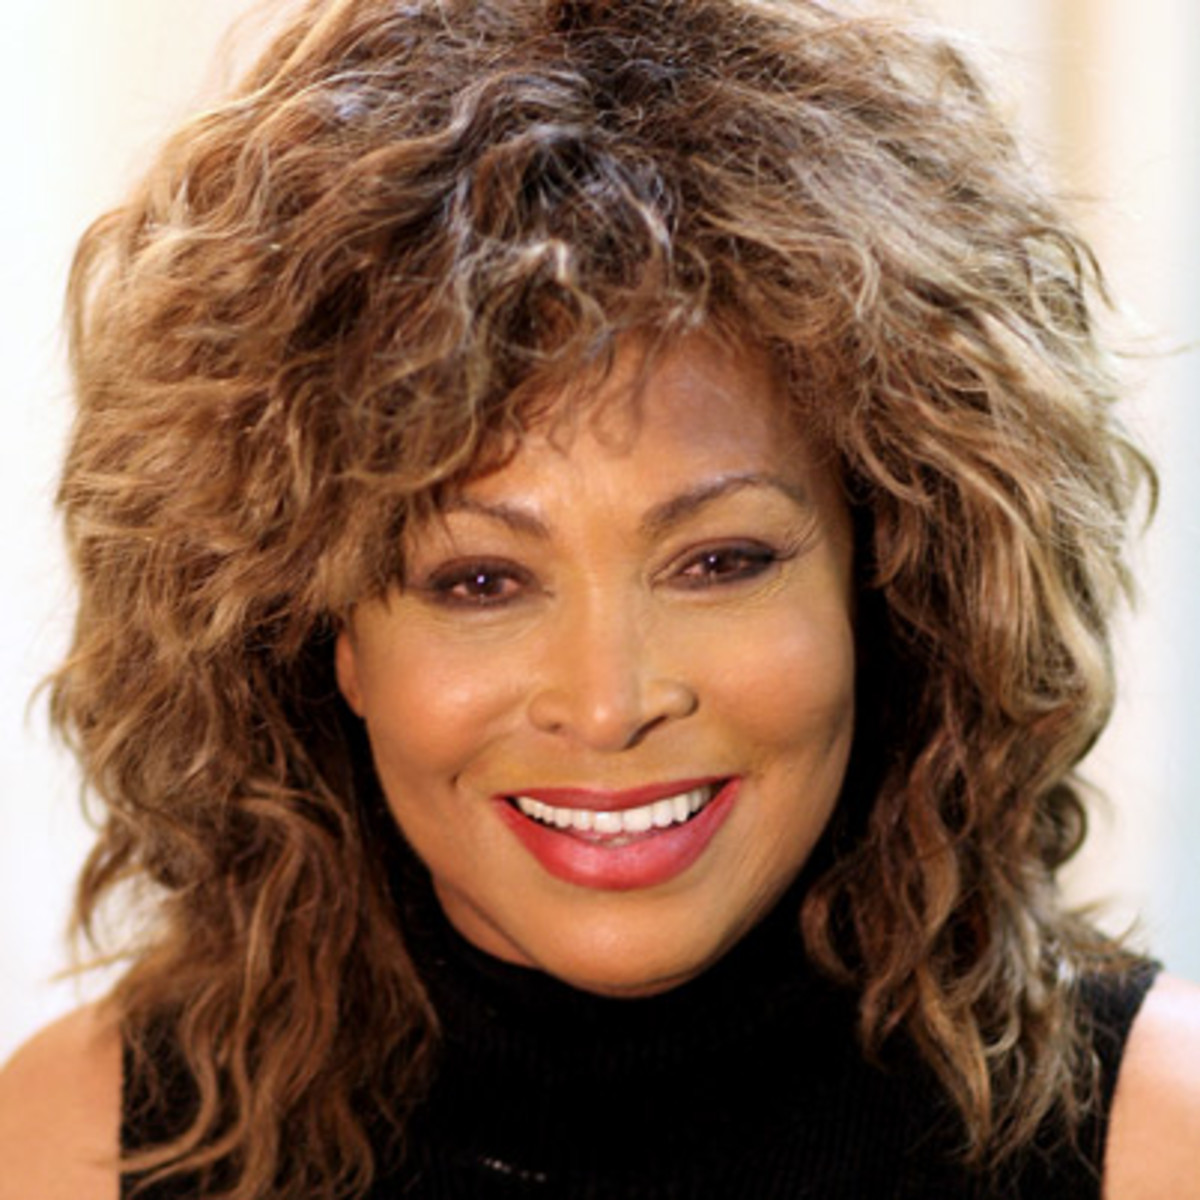 How tall is Tina Turner?